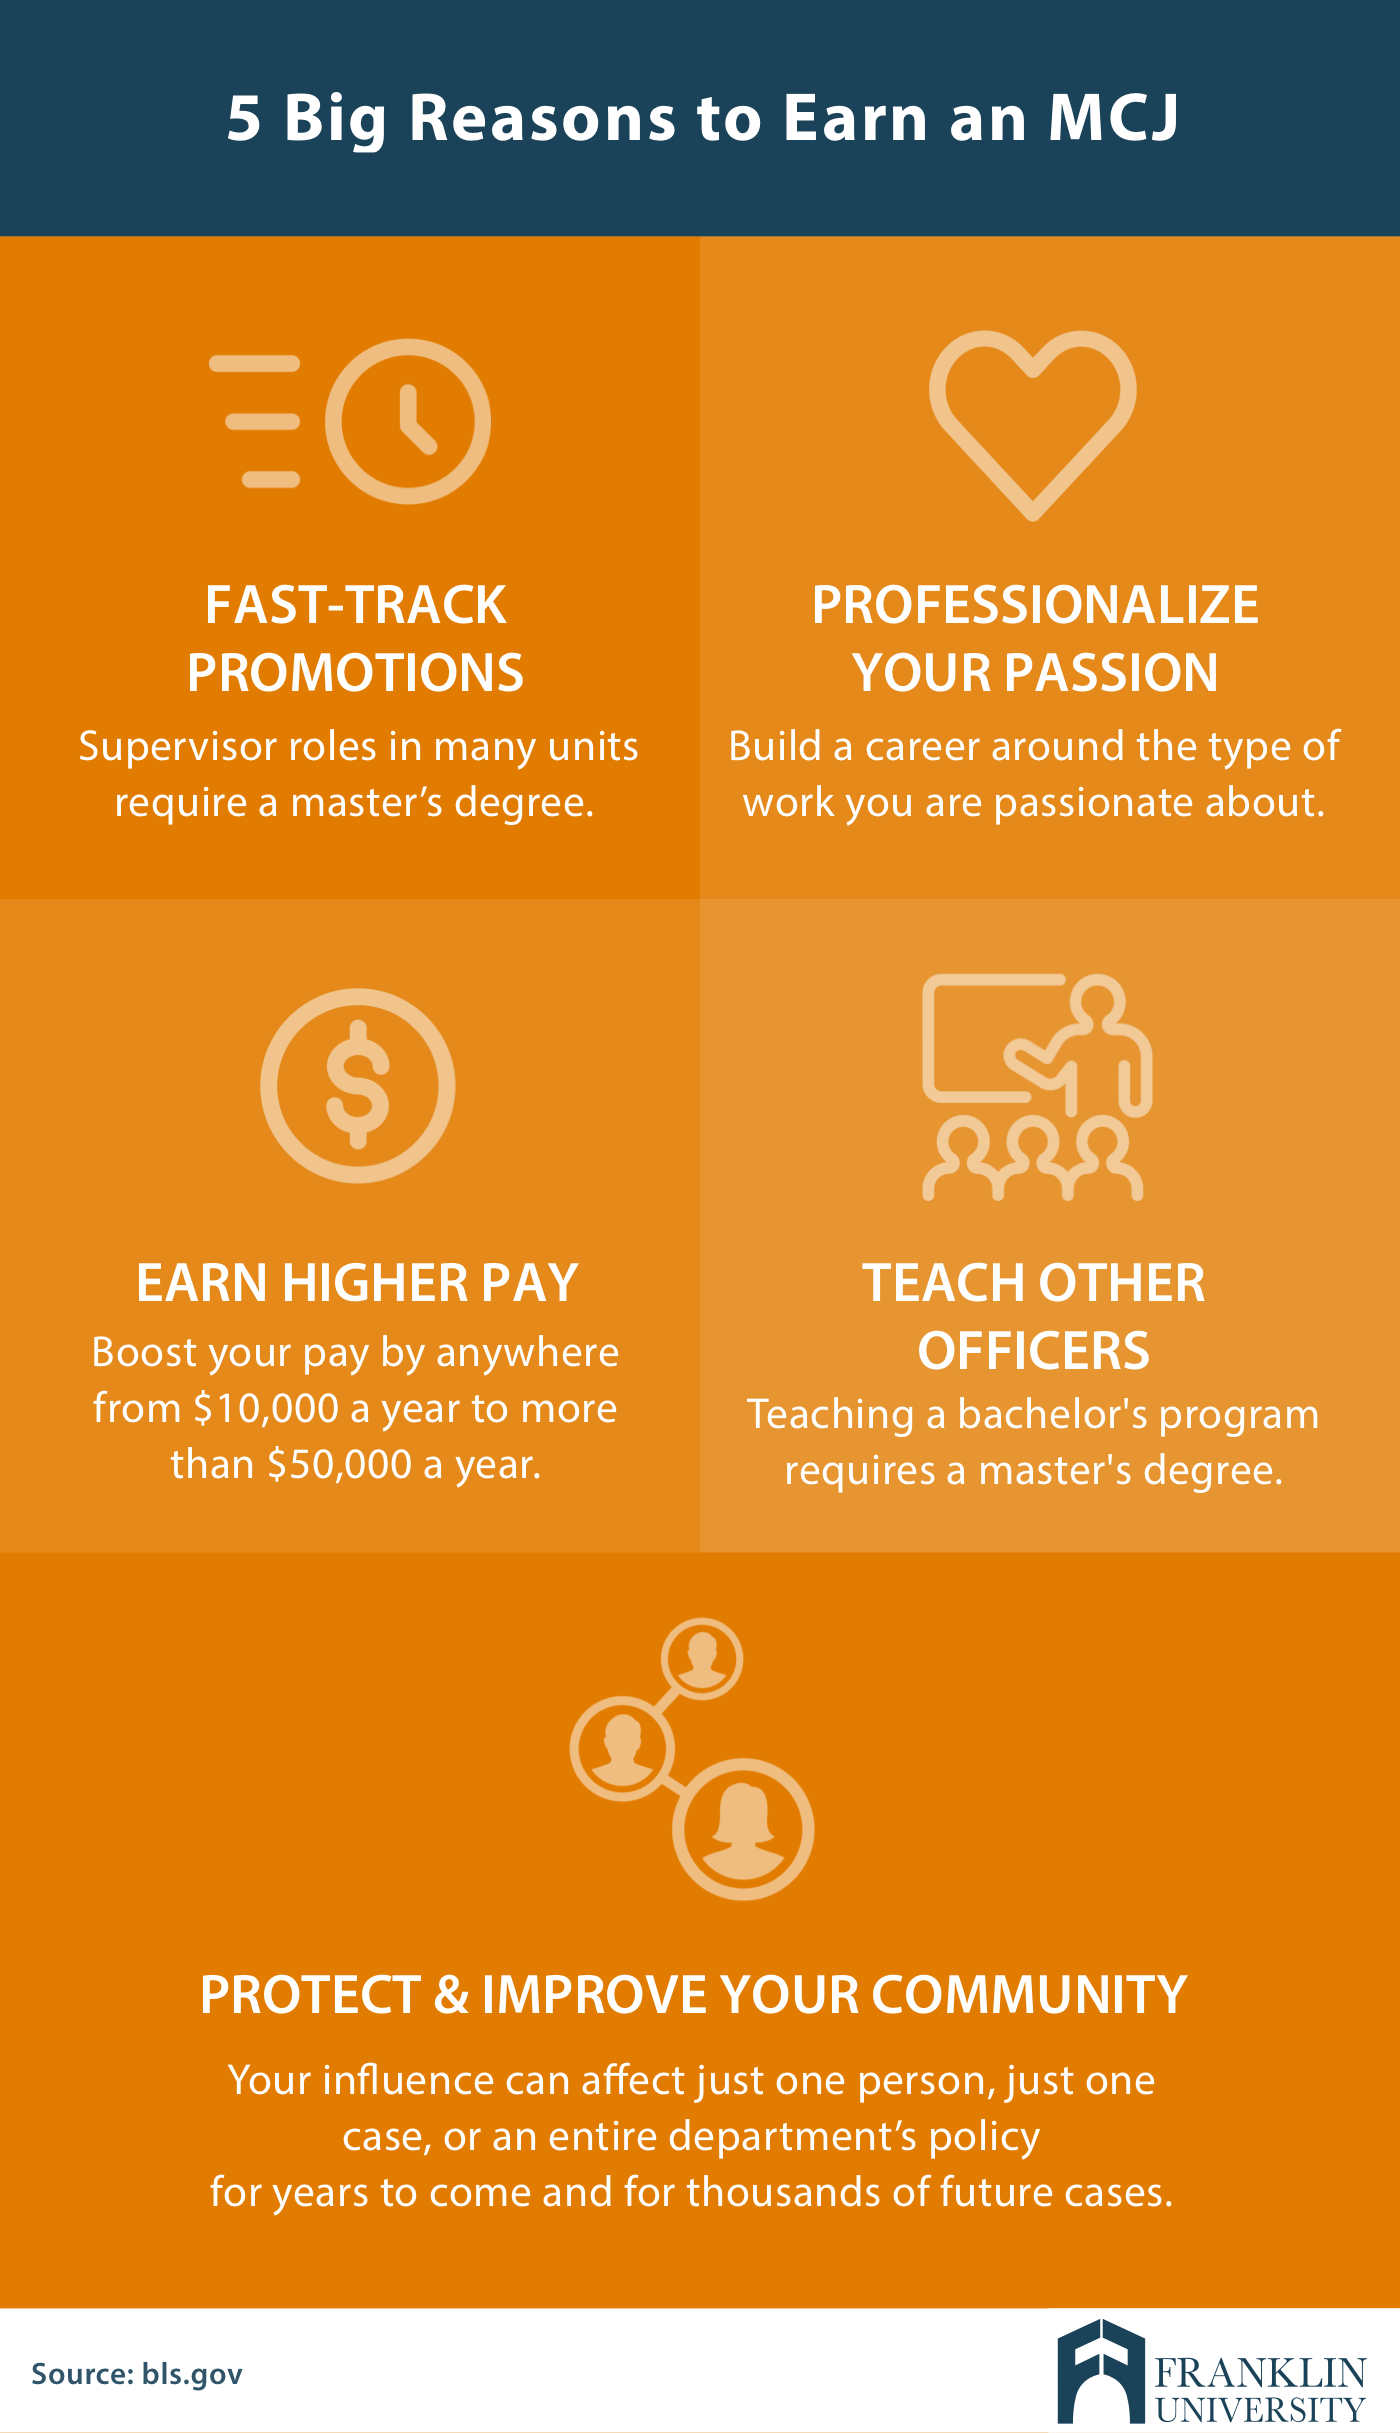 graphic describes 5 big reasons to earn an MCJ